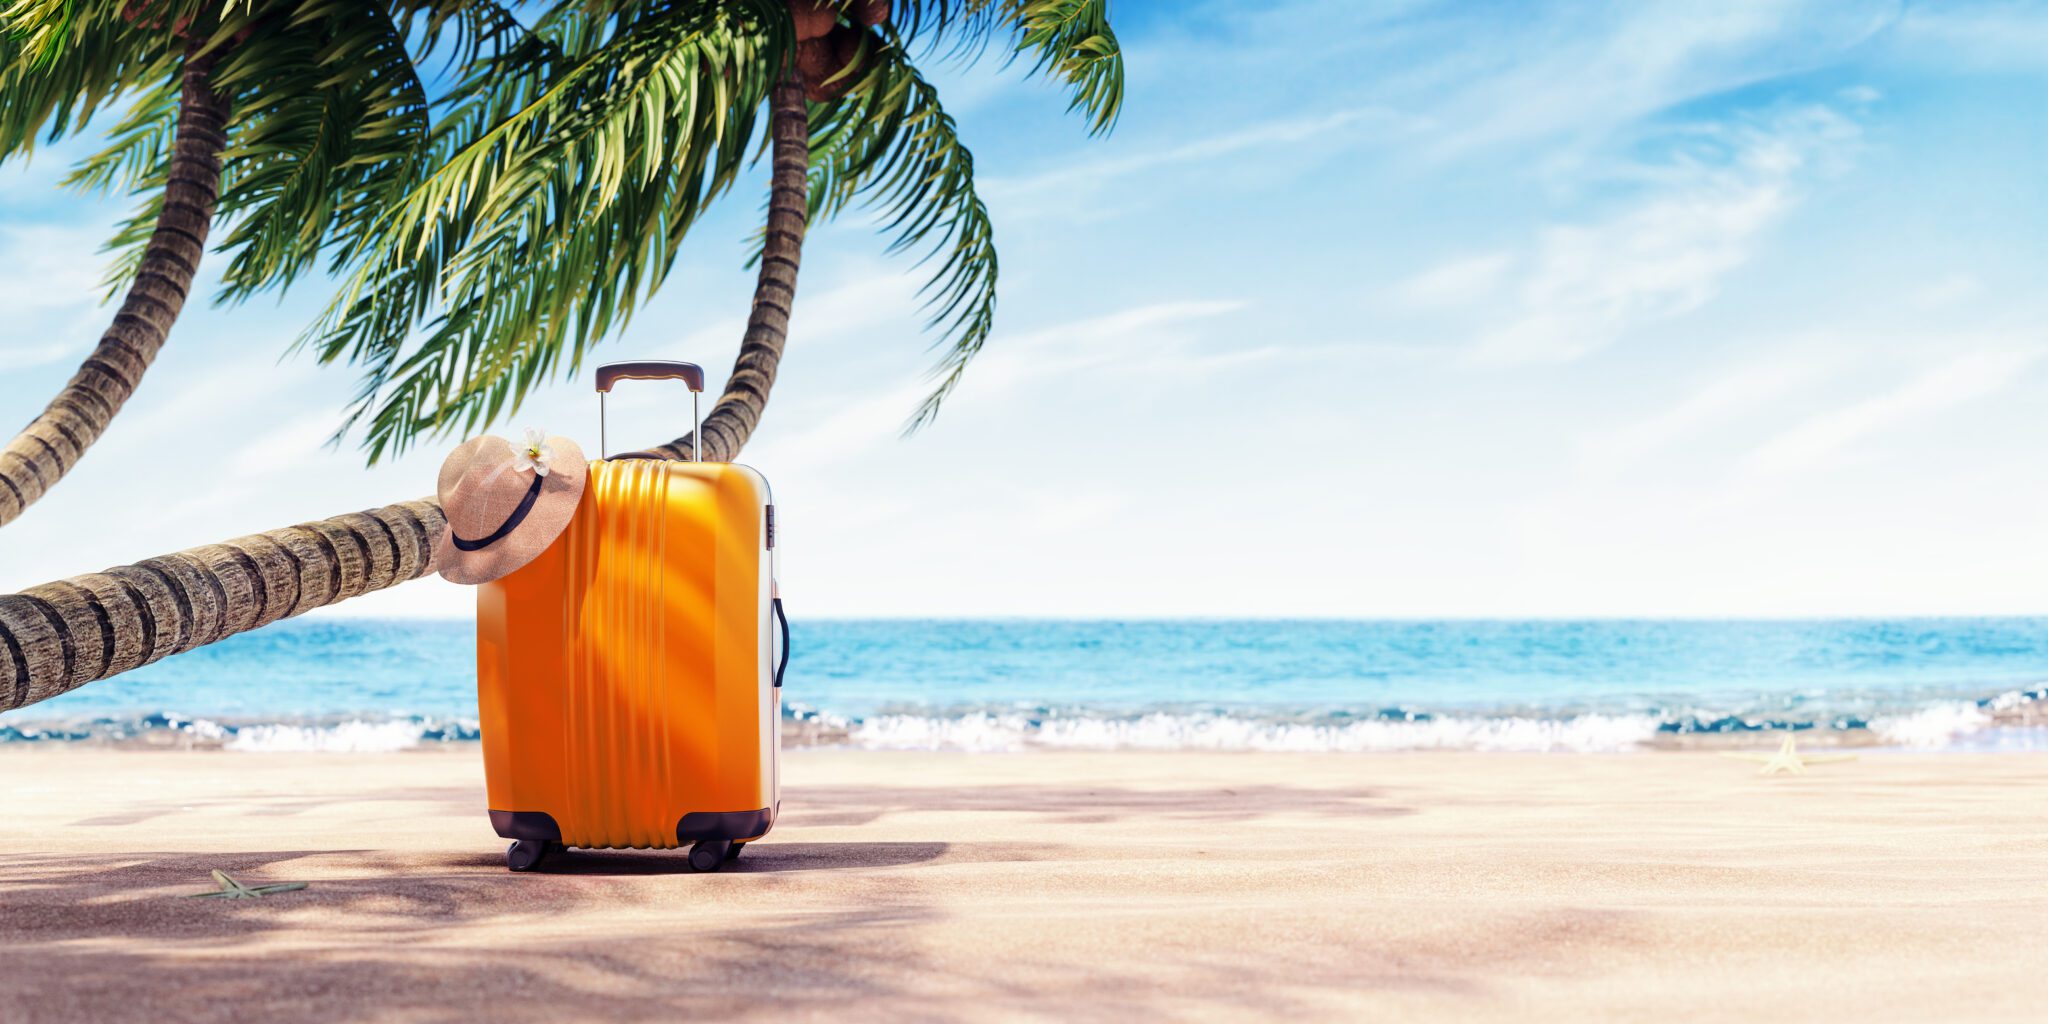 CheapOair launched vacation savings accounts. Source: Accrue/Shutterstock